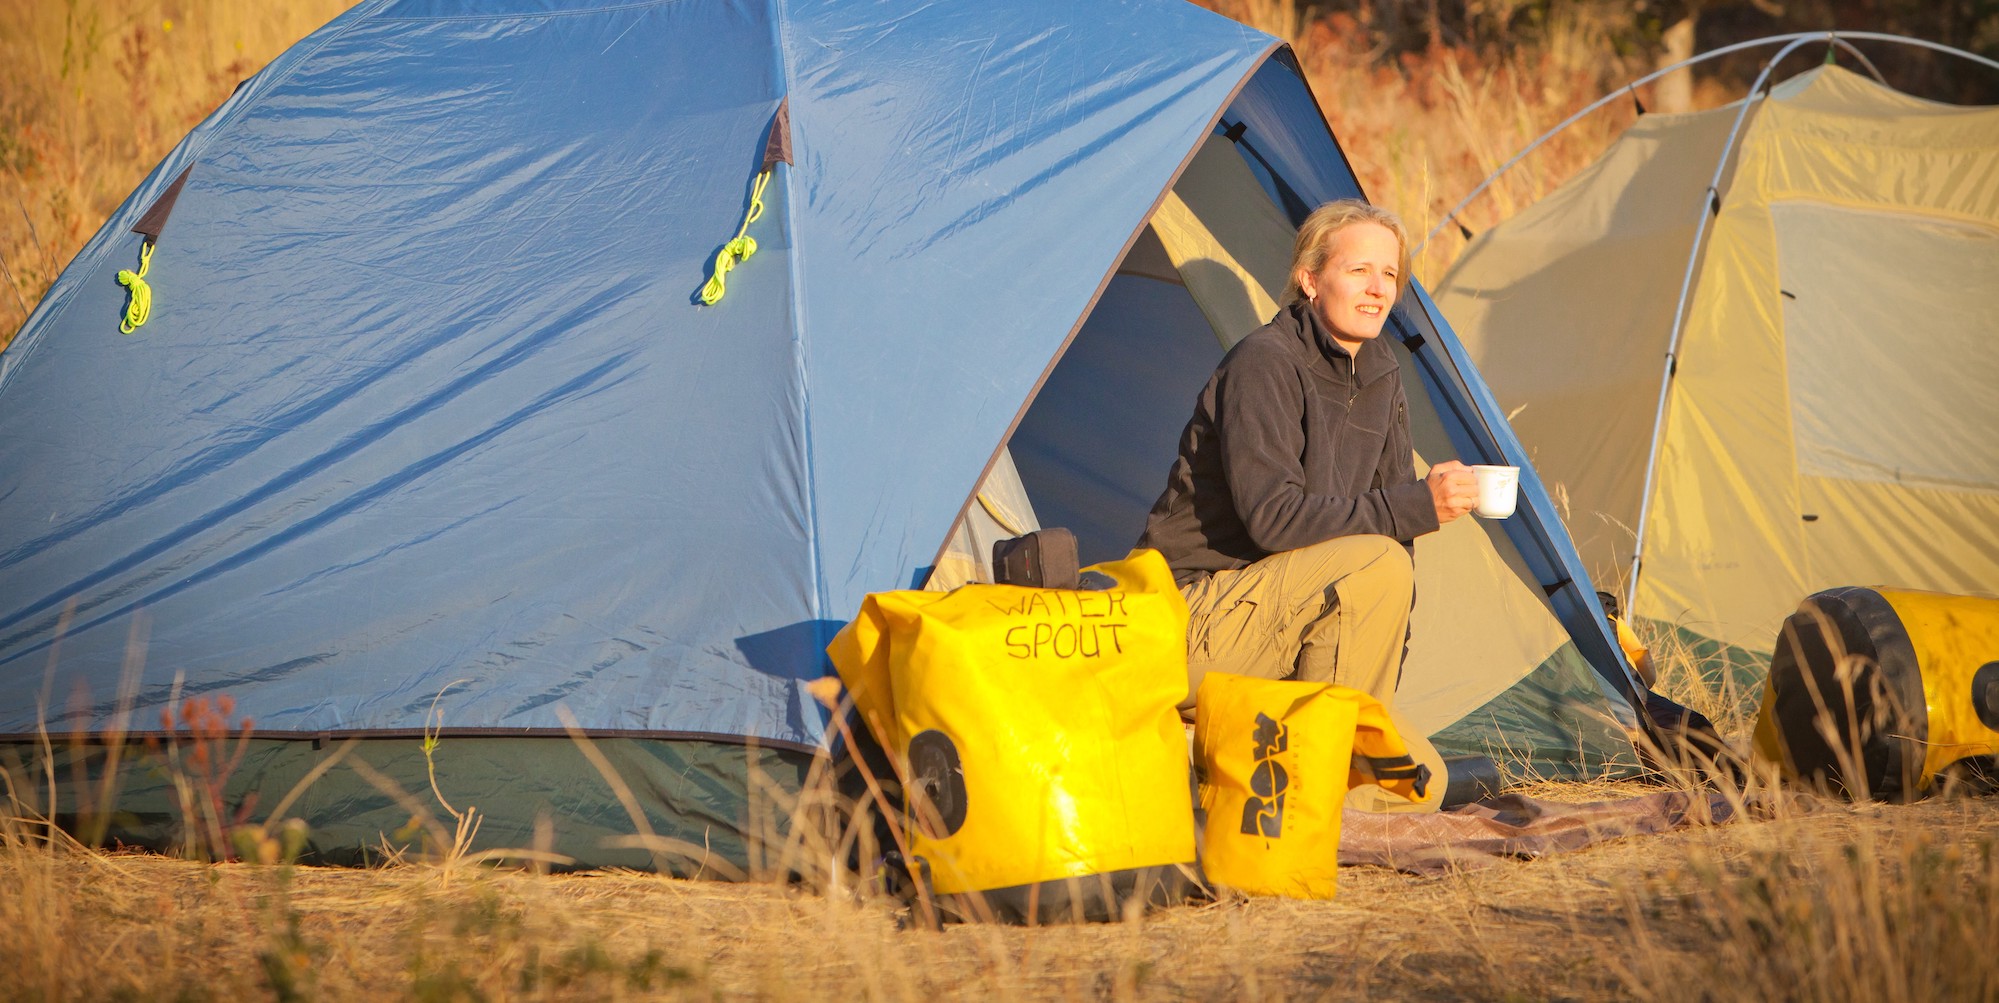 A woman sitting outsider her blue tent at sunset with numerous yellow dry bags outside her tent